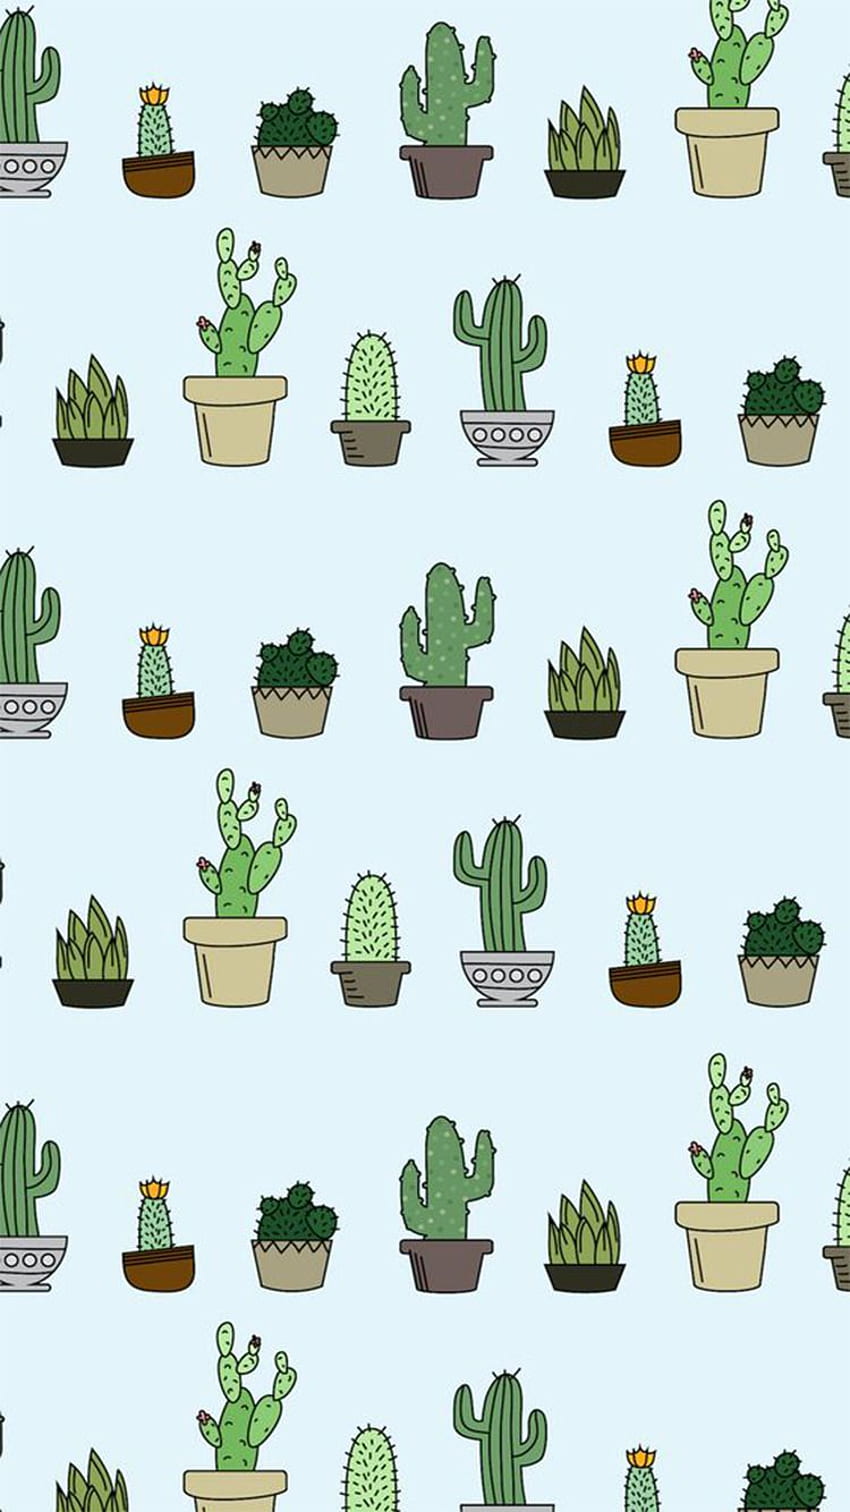 The Cute Cactus Wallpaper Background Wallpaper Image For Free Download   Pngtree